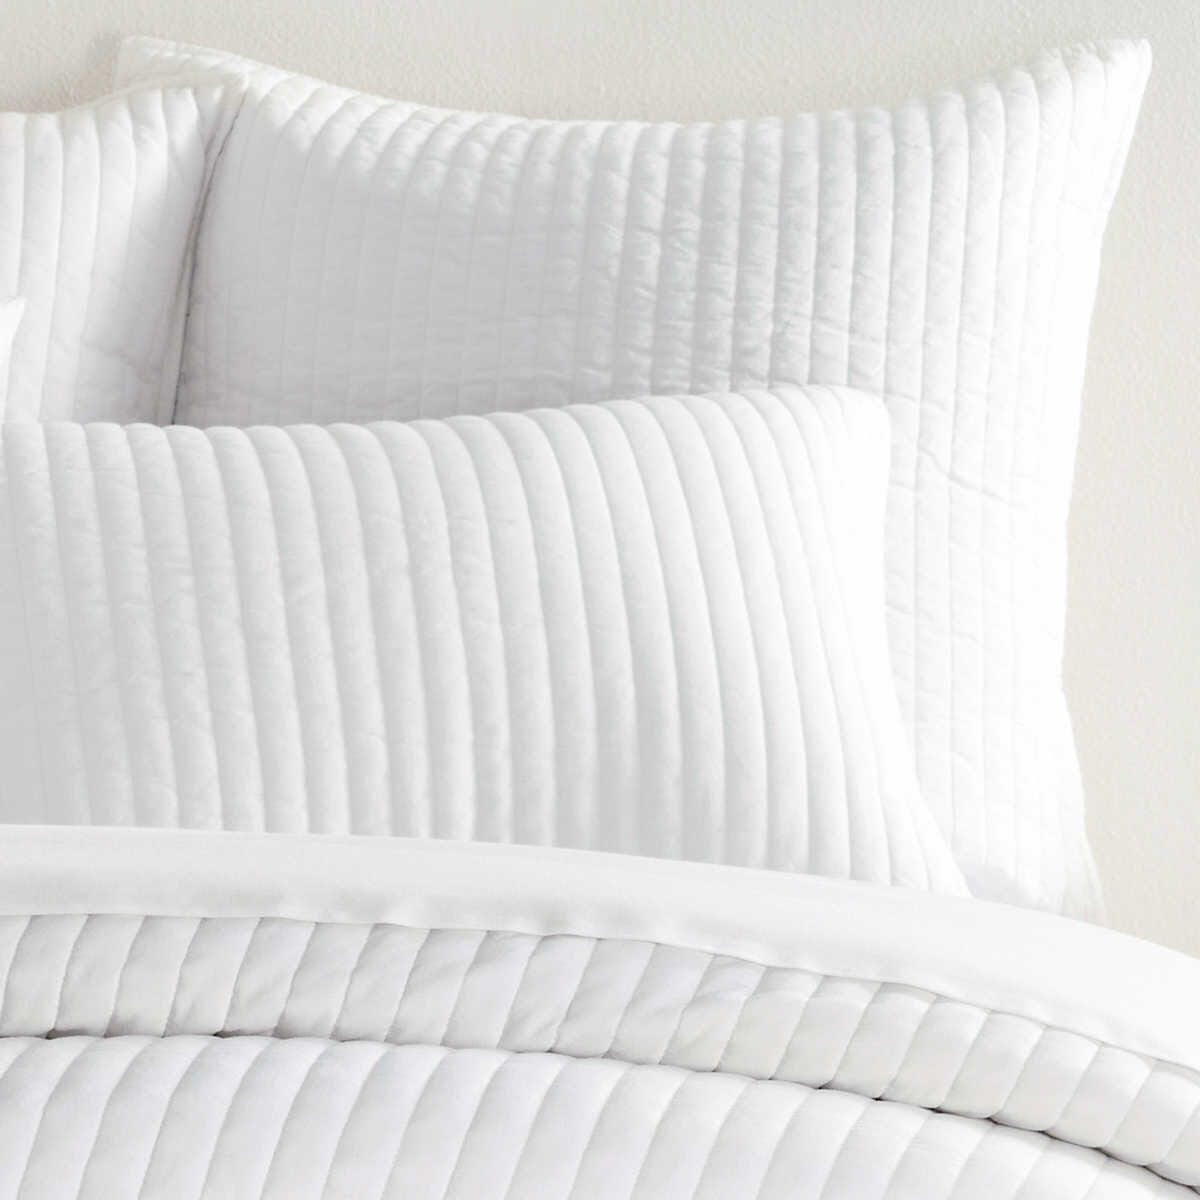 Cozy Cotton White Quilted Sham Pillowcases & Shams 